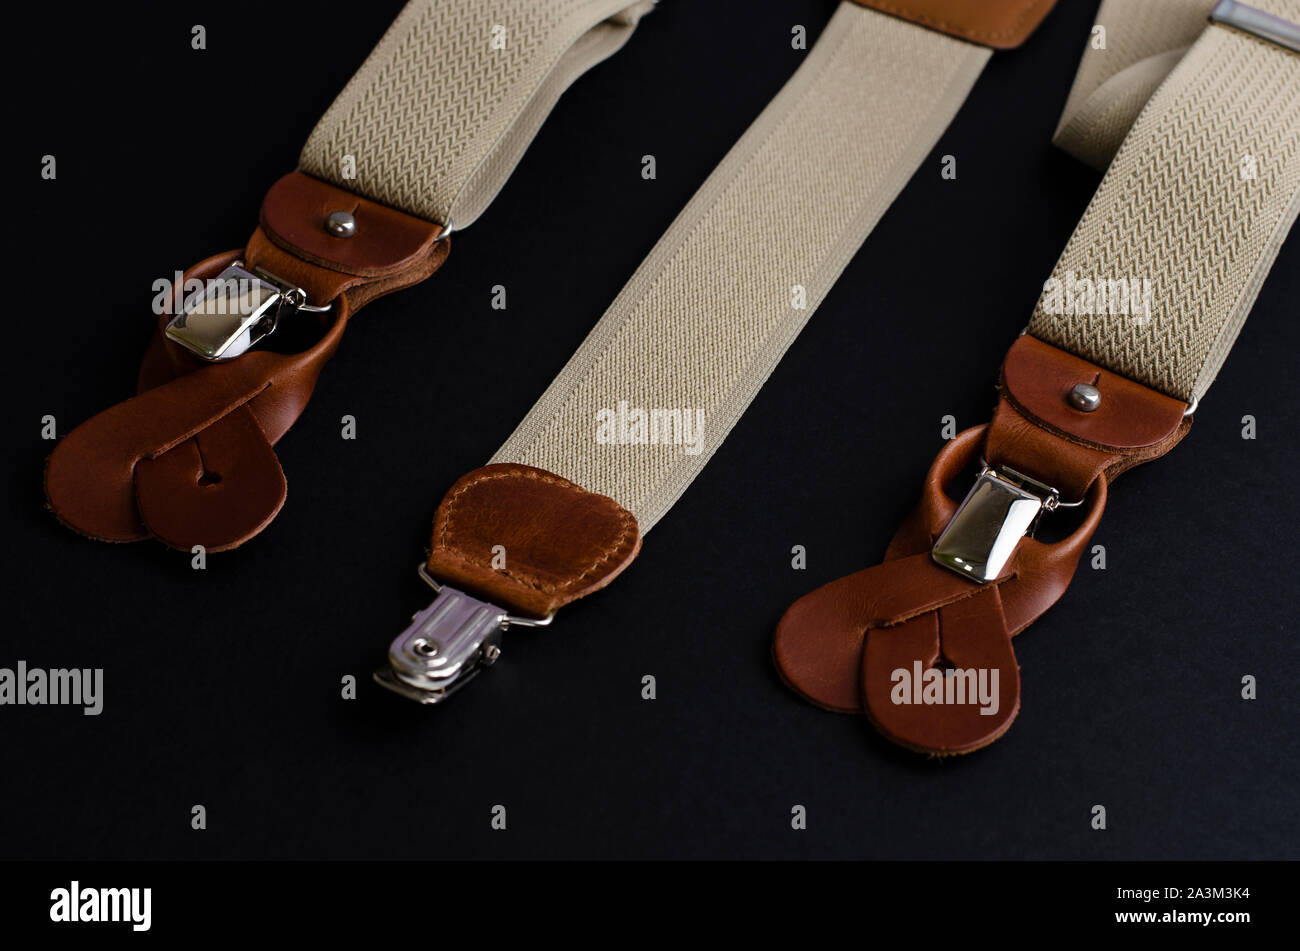 Close-up on Leather details of suspenders on black background. Men's accessories concept Stock Photo